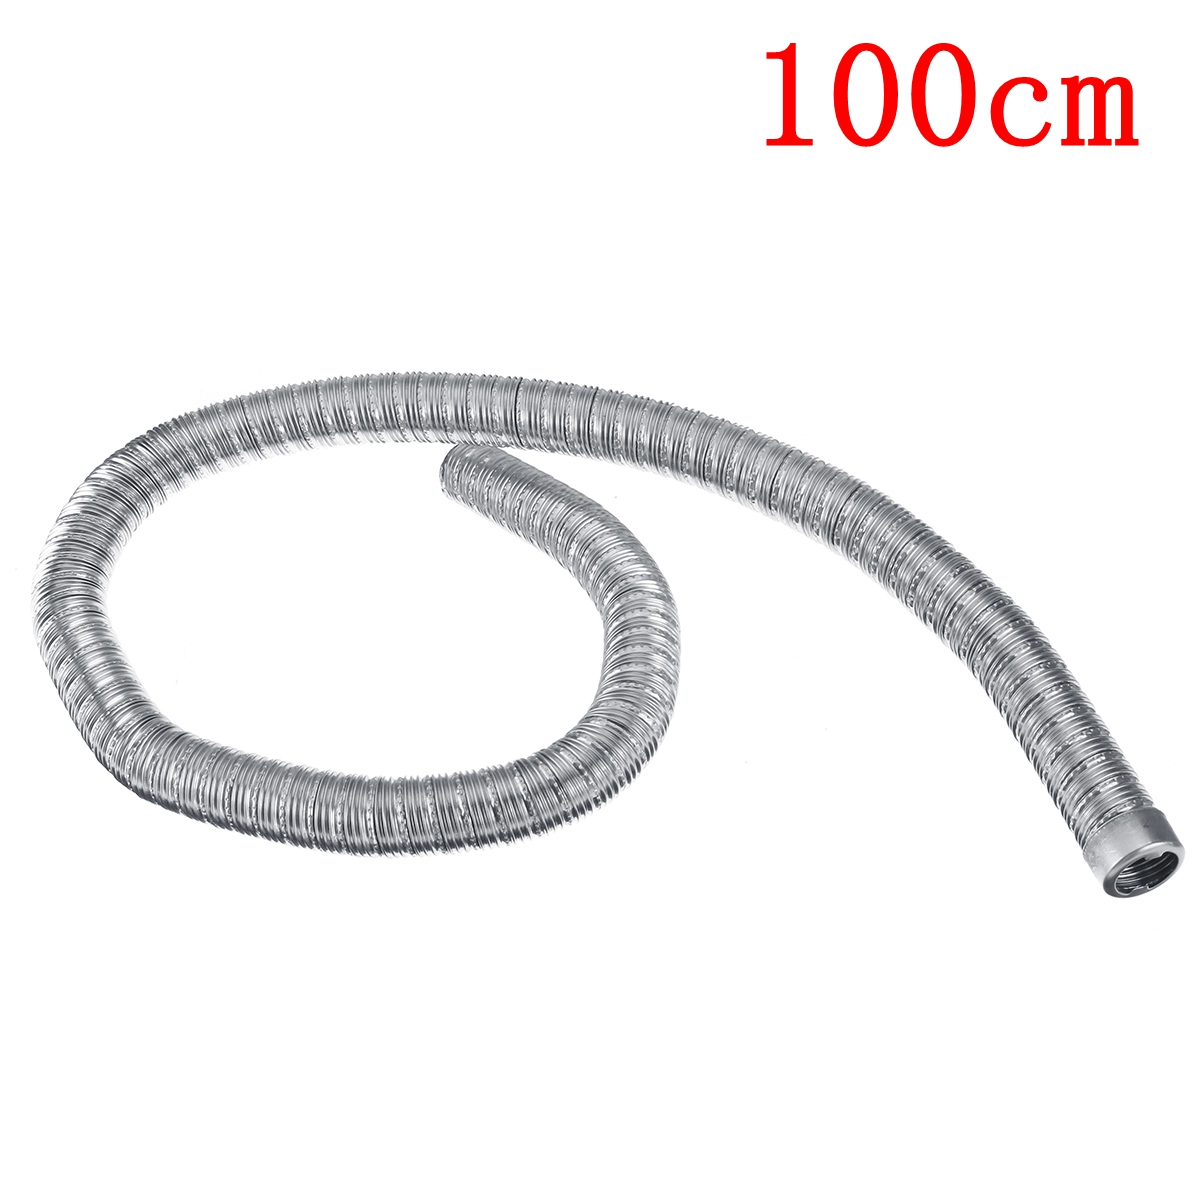 100cm-ID24mm-Stainless-Steel-Air-Diesel-Exhaust-Pipe-With-Cap-For-Webasto-Heater-1783700-3